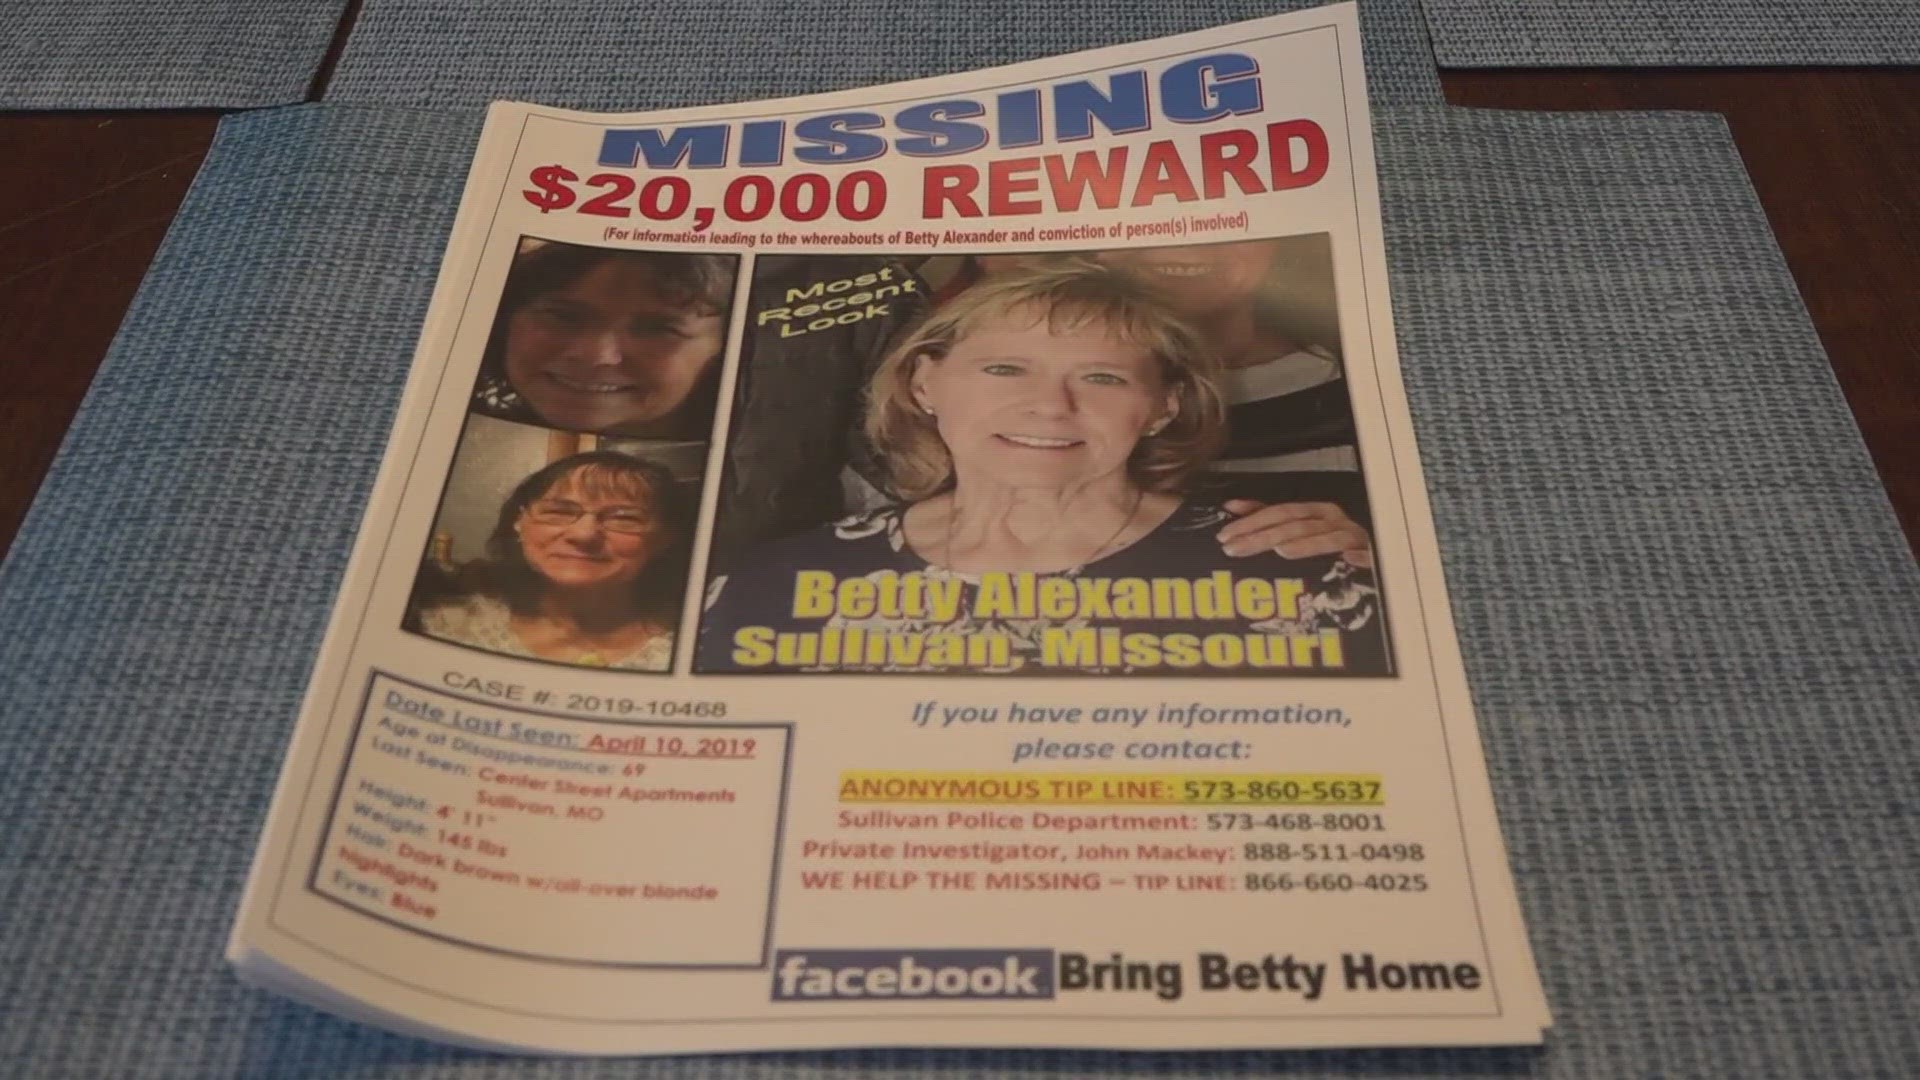 72-year-old Betty Alexander went missing from her apartment complex on April 10, 2019